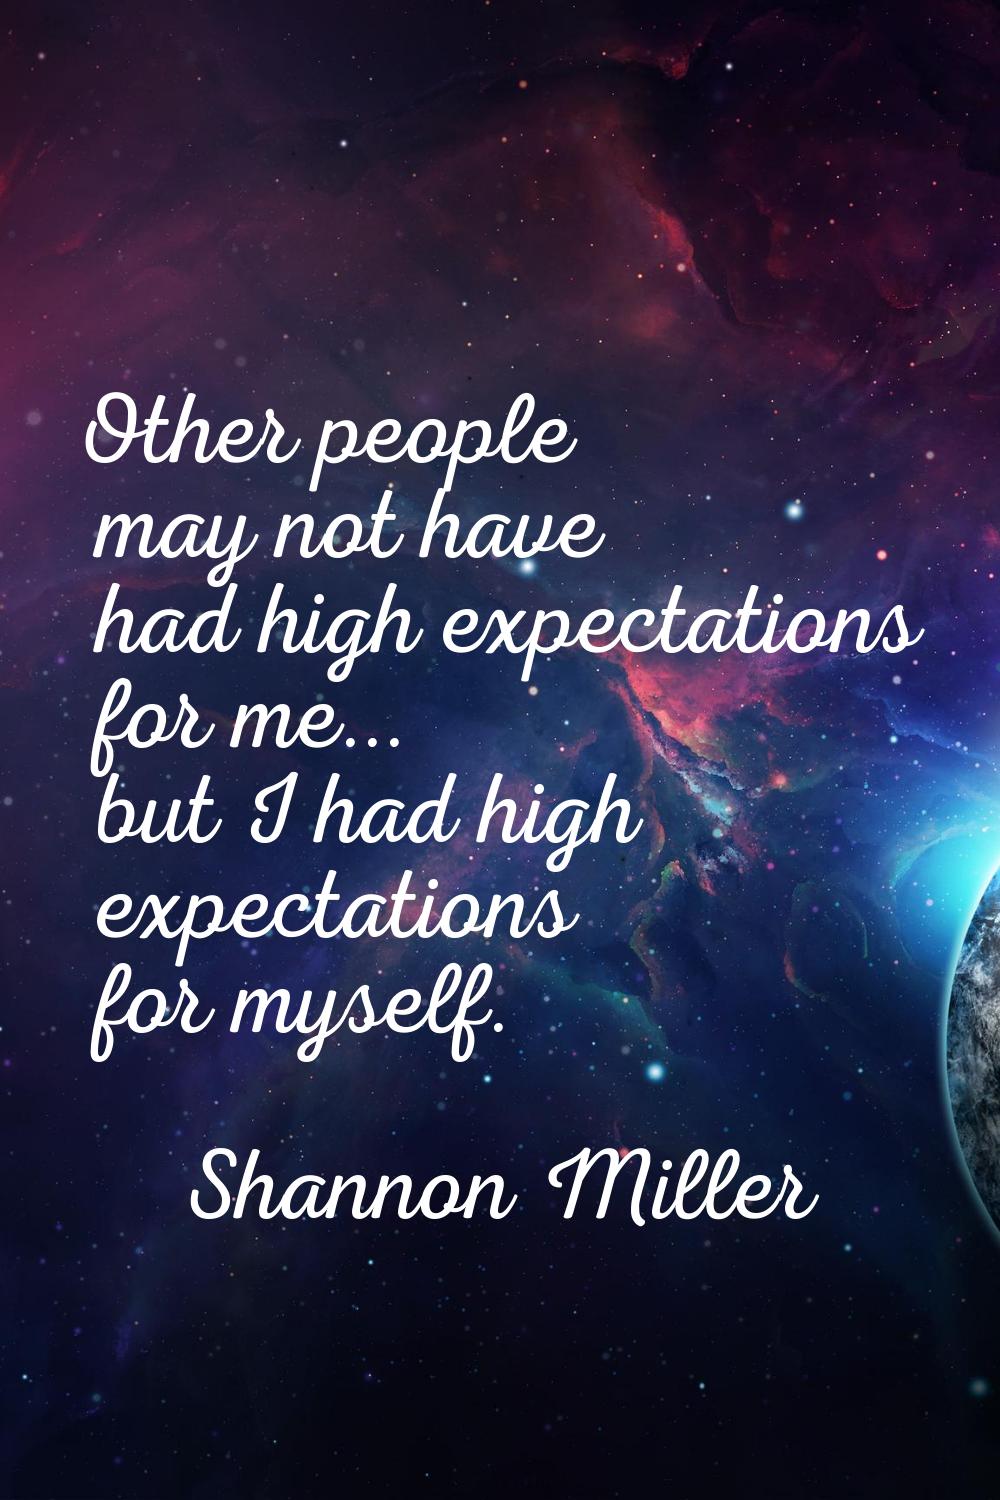 Other people may not have had high expectations for me... but I had high expectations for myself.